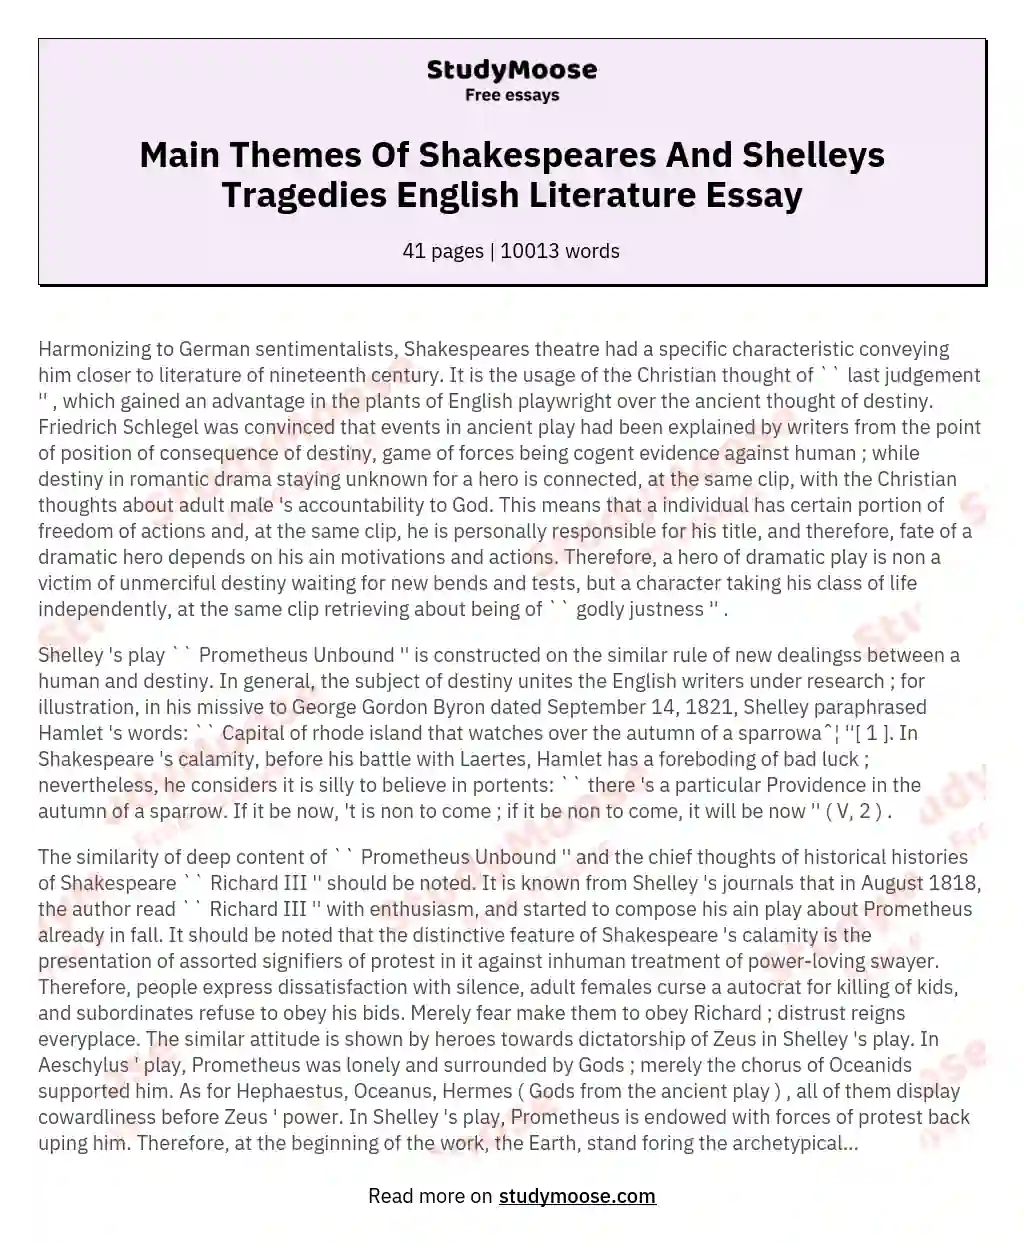 Main Themes Of Shakespeares And Shelleys Tragedies English Literature Essay